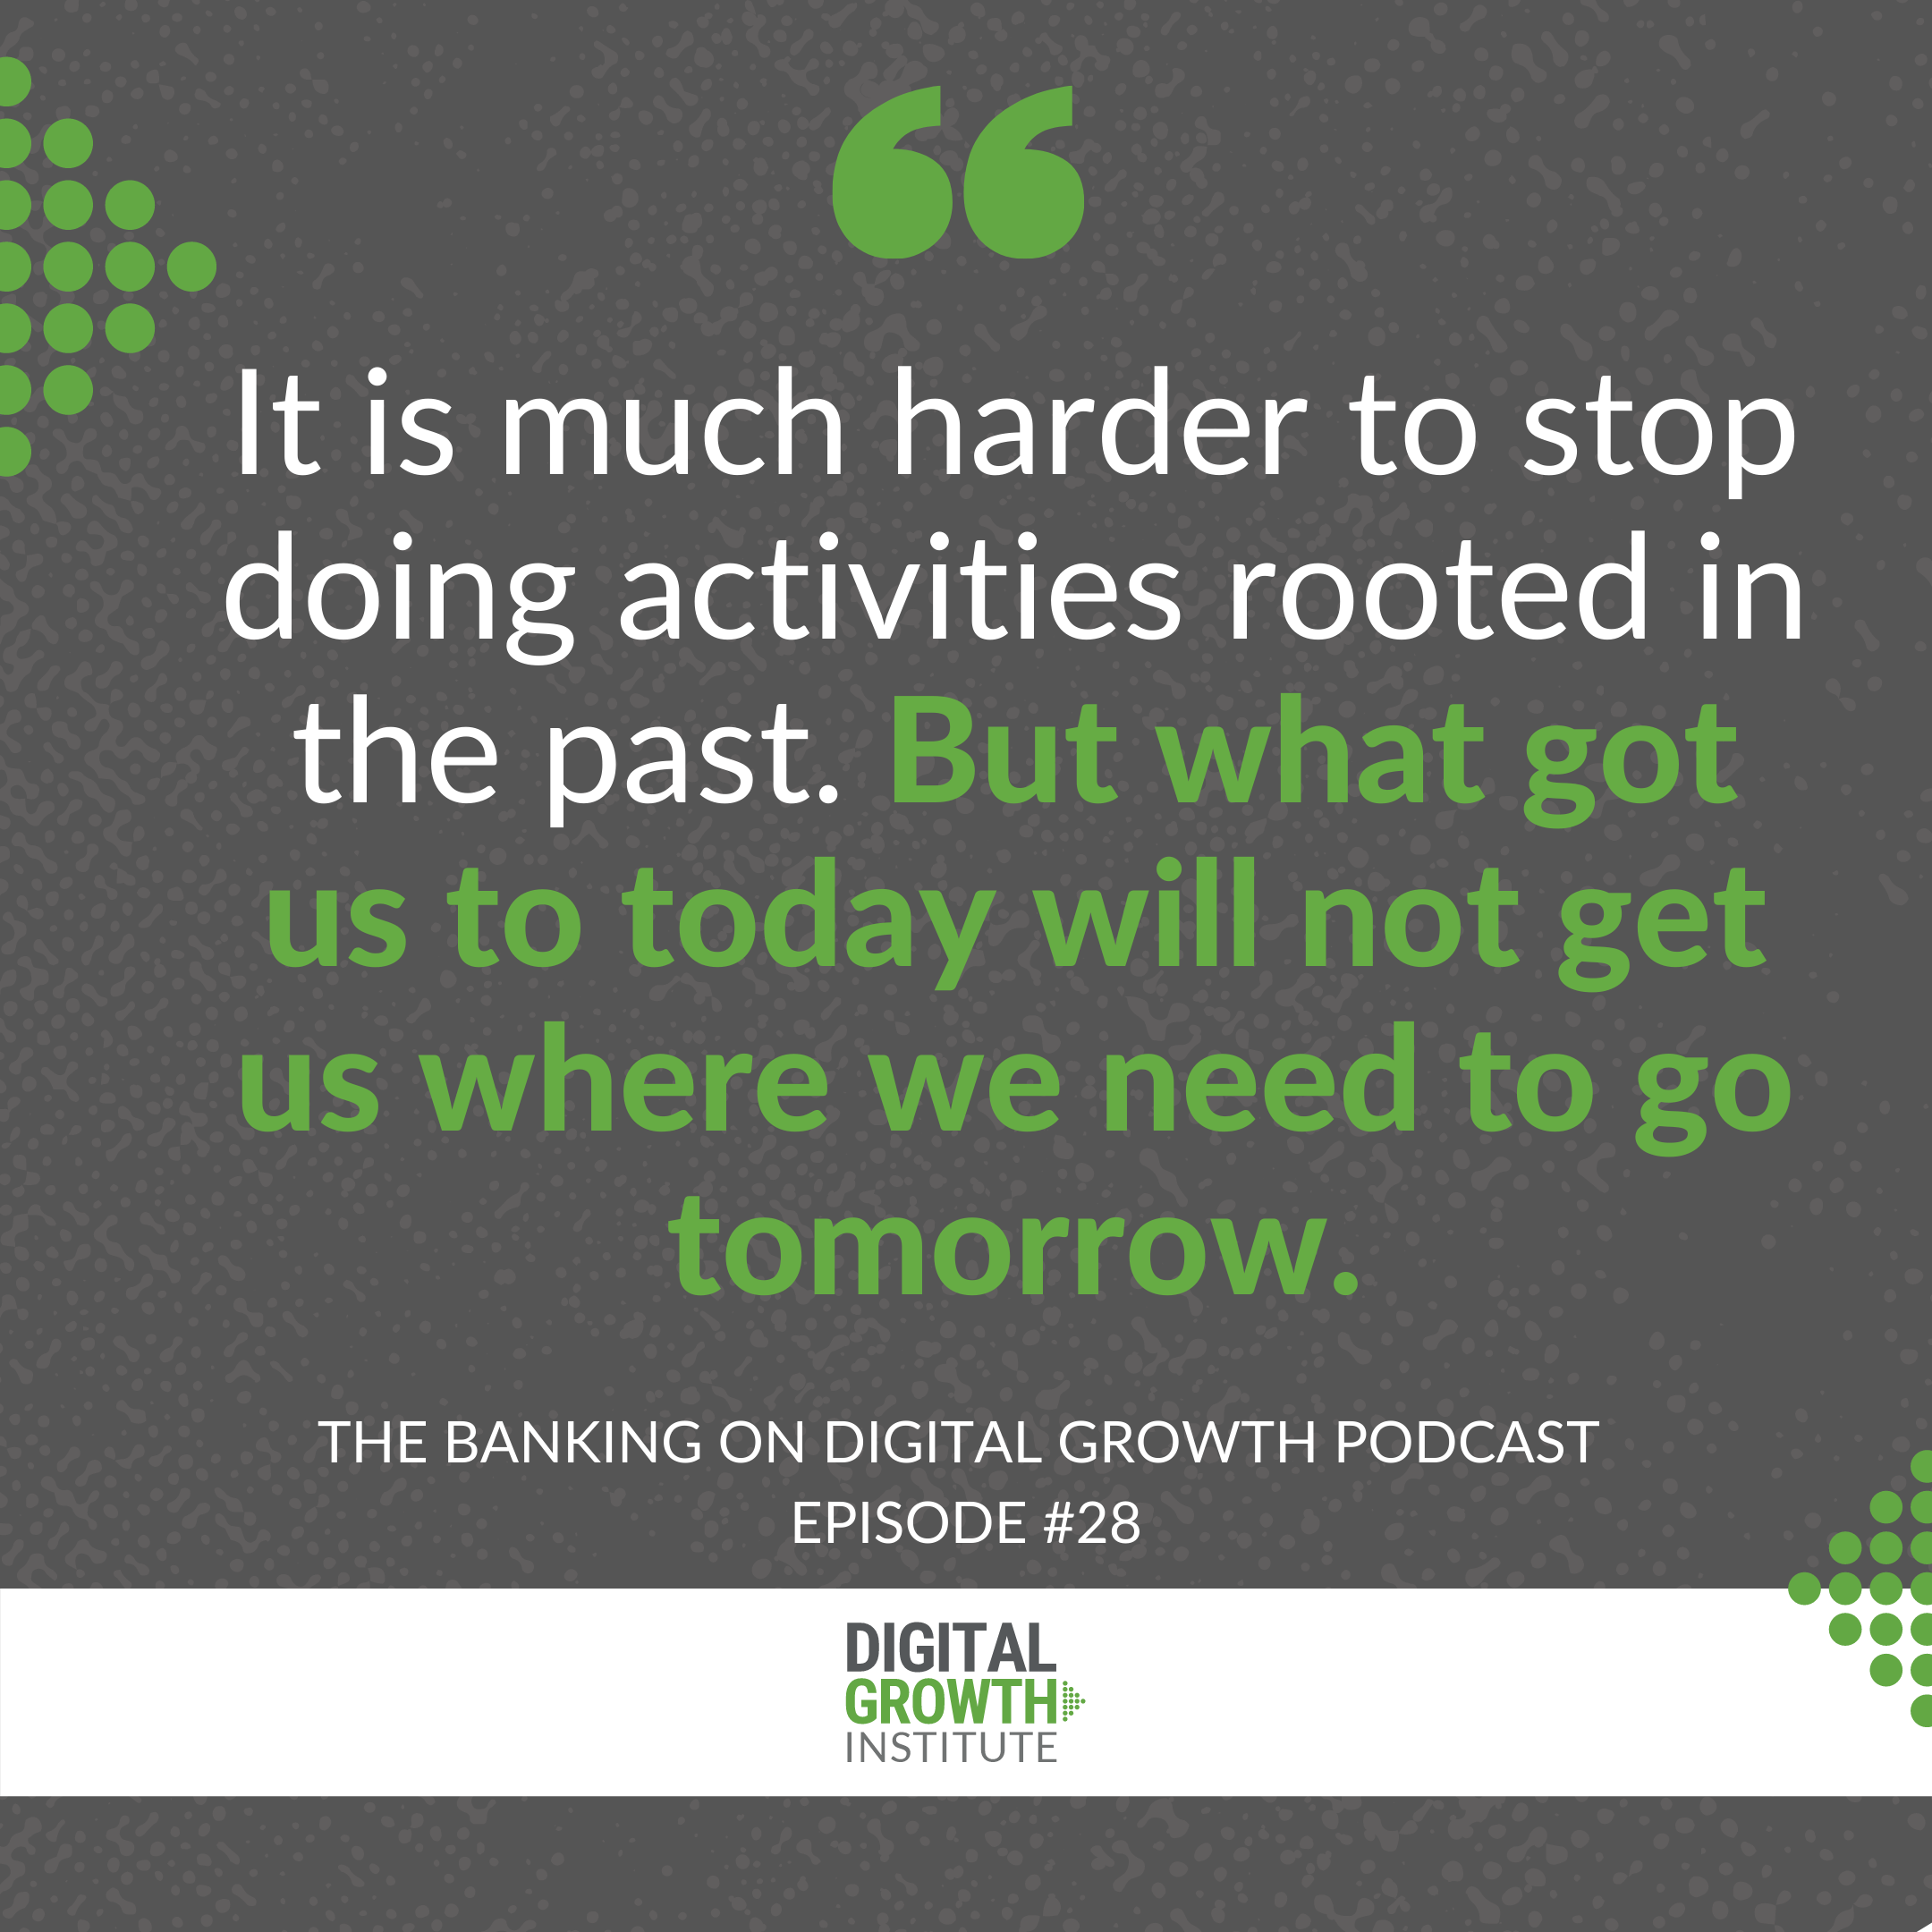 Future Digital Growth for Financial Brands